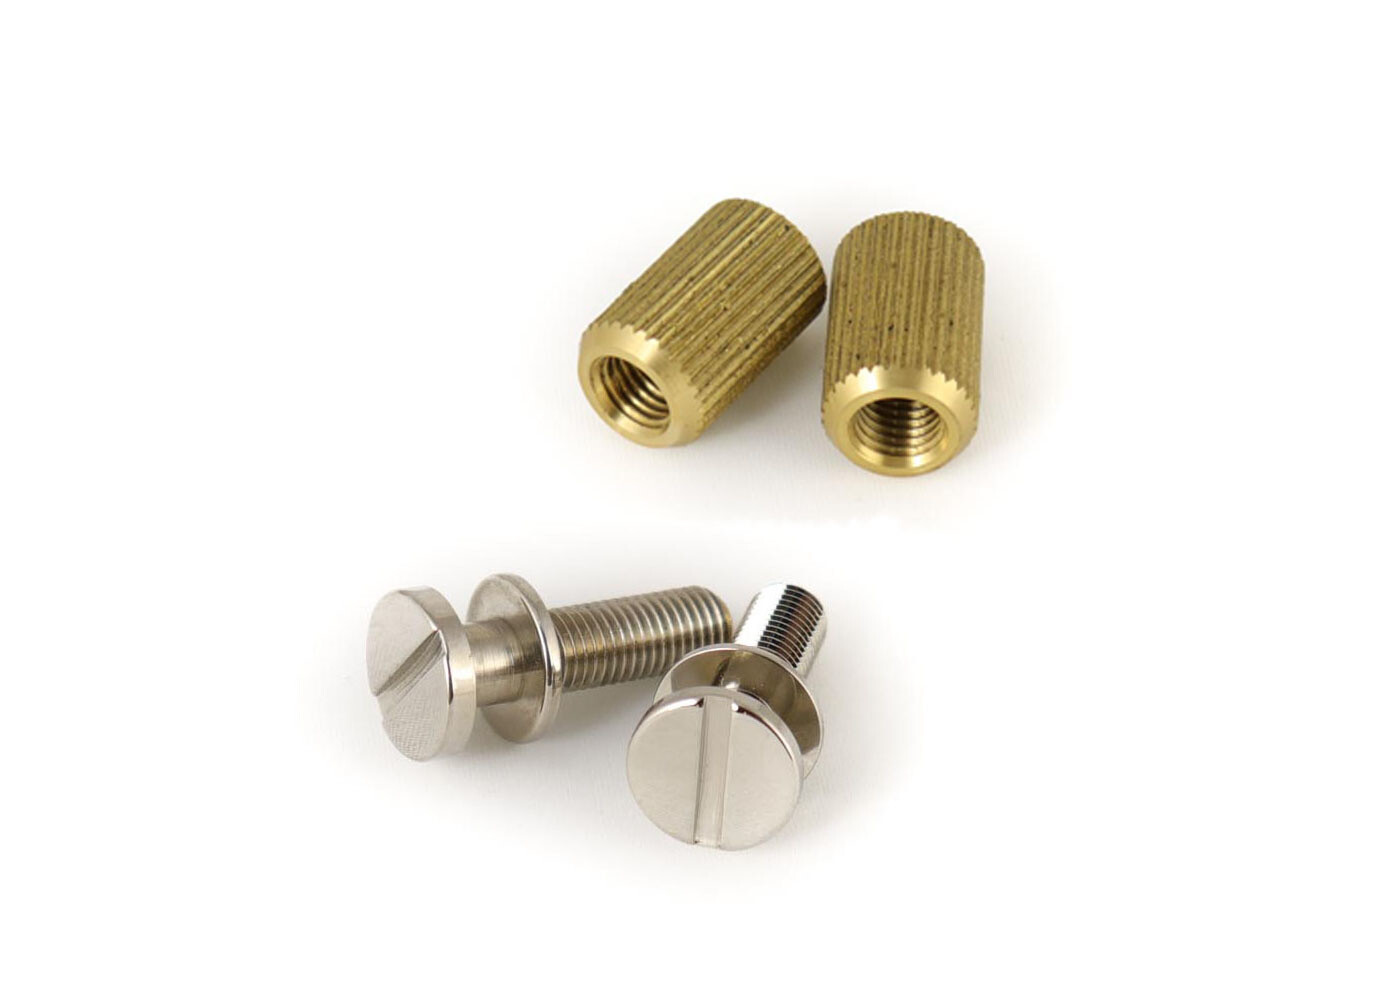 MannMade USA MannMade USA Stoptail Stud & Well set -  US Thread - Nickel